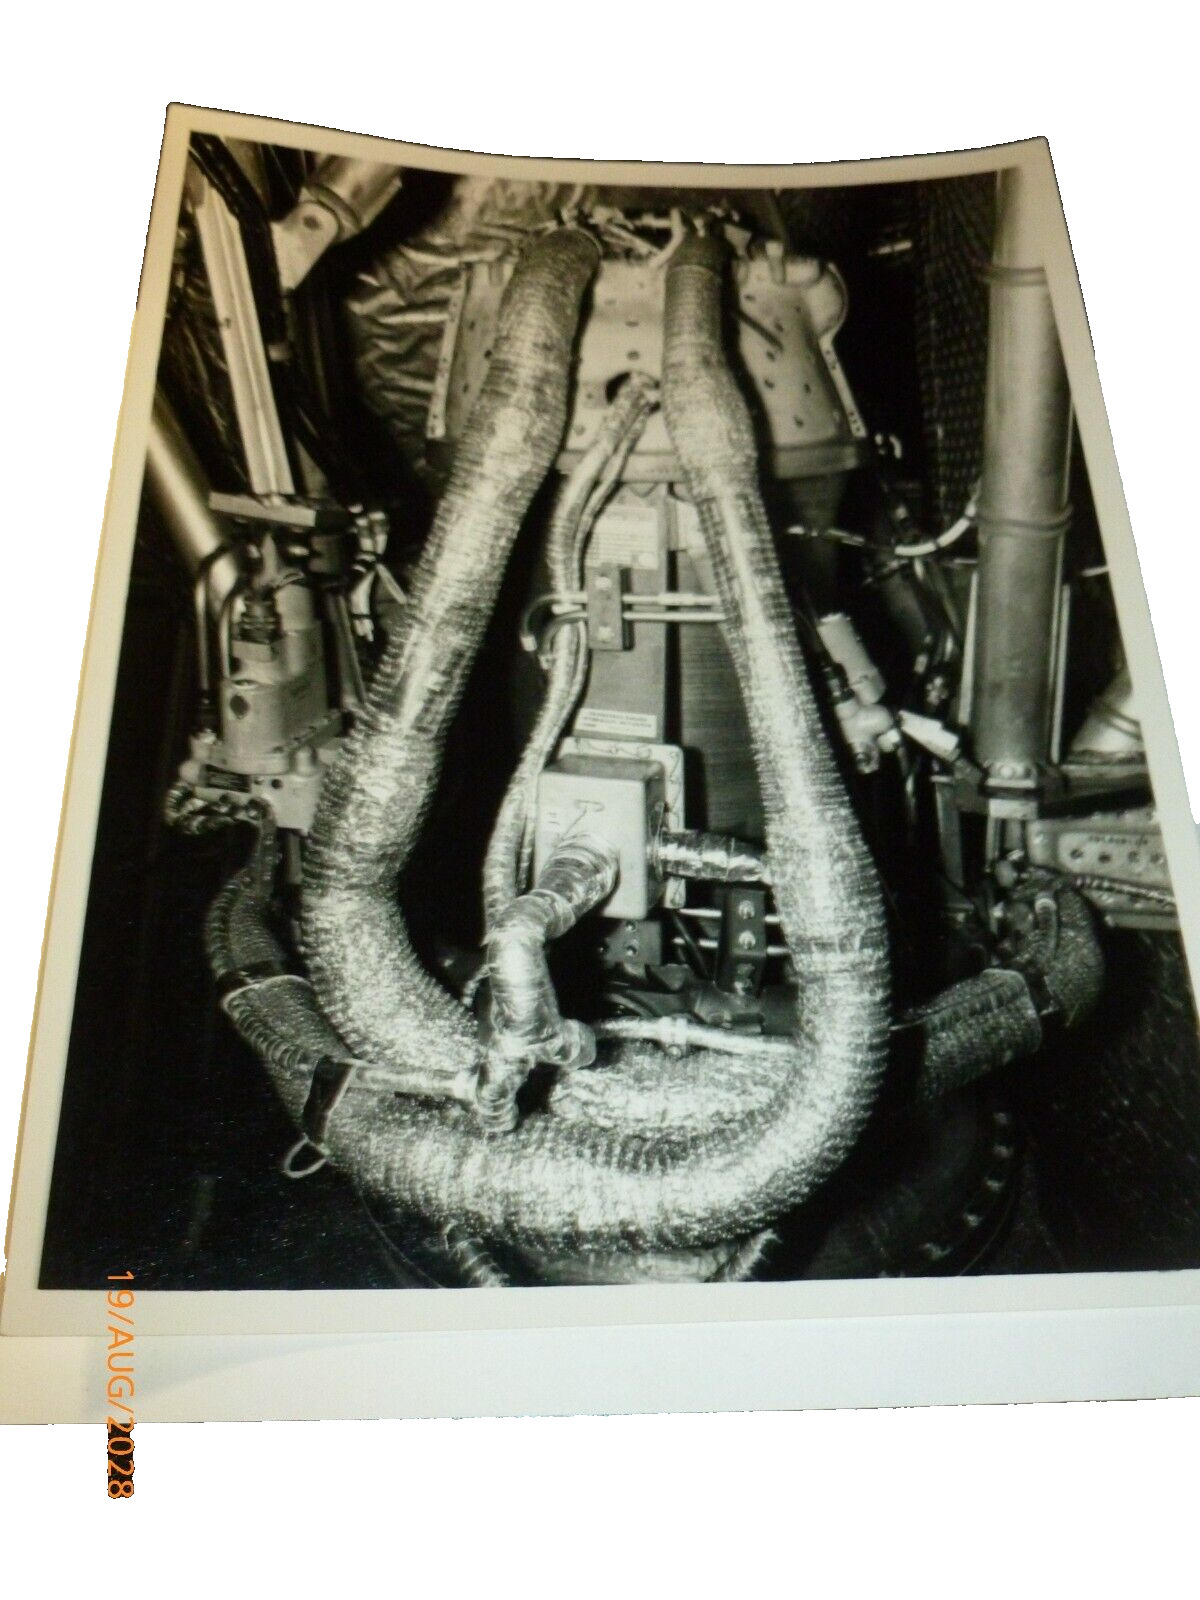 US Air Force Unclassified Titan III rocket Photo 3rd Stage Engine Section 1964